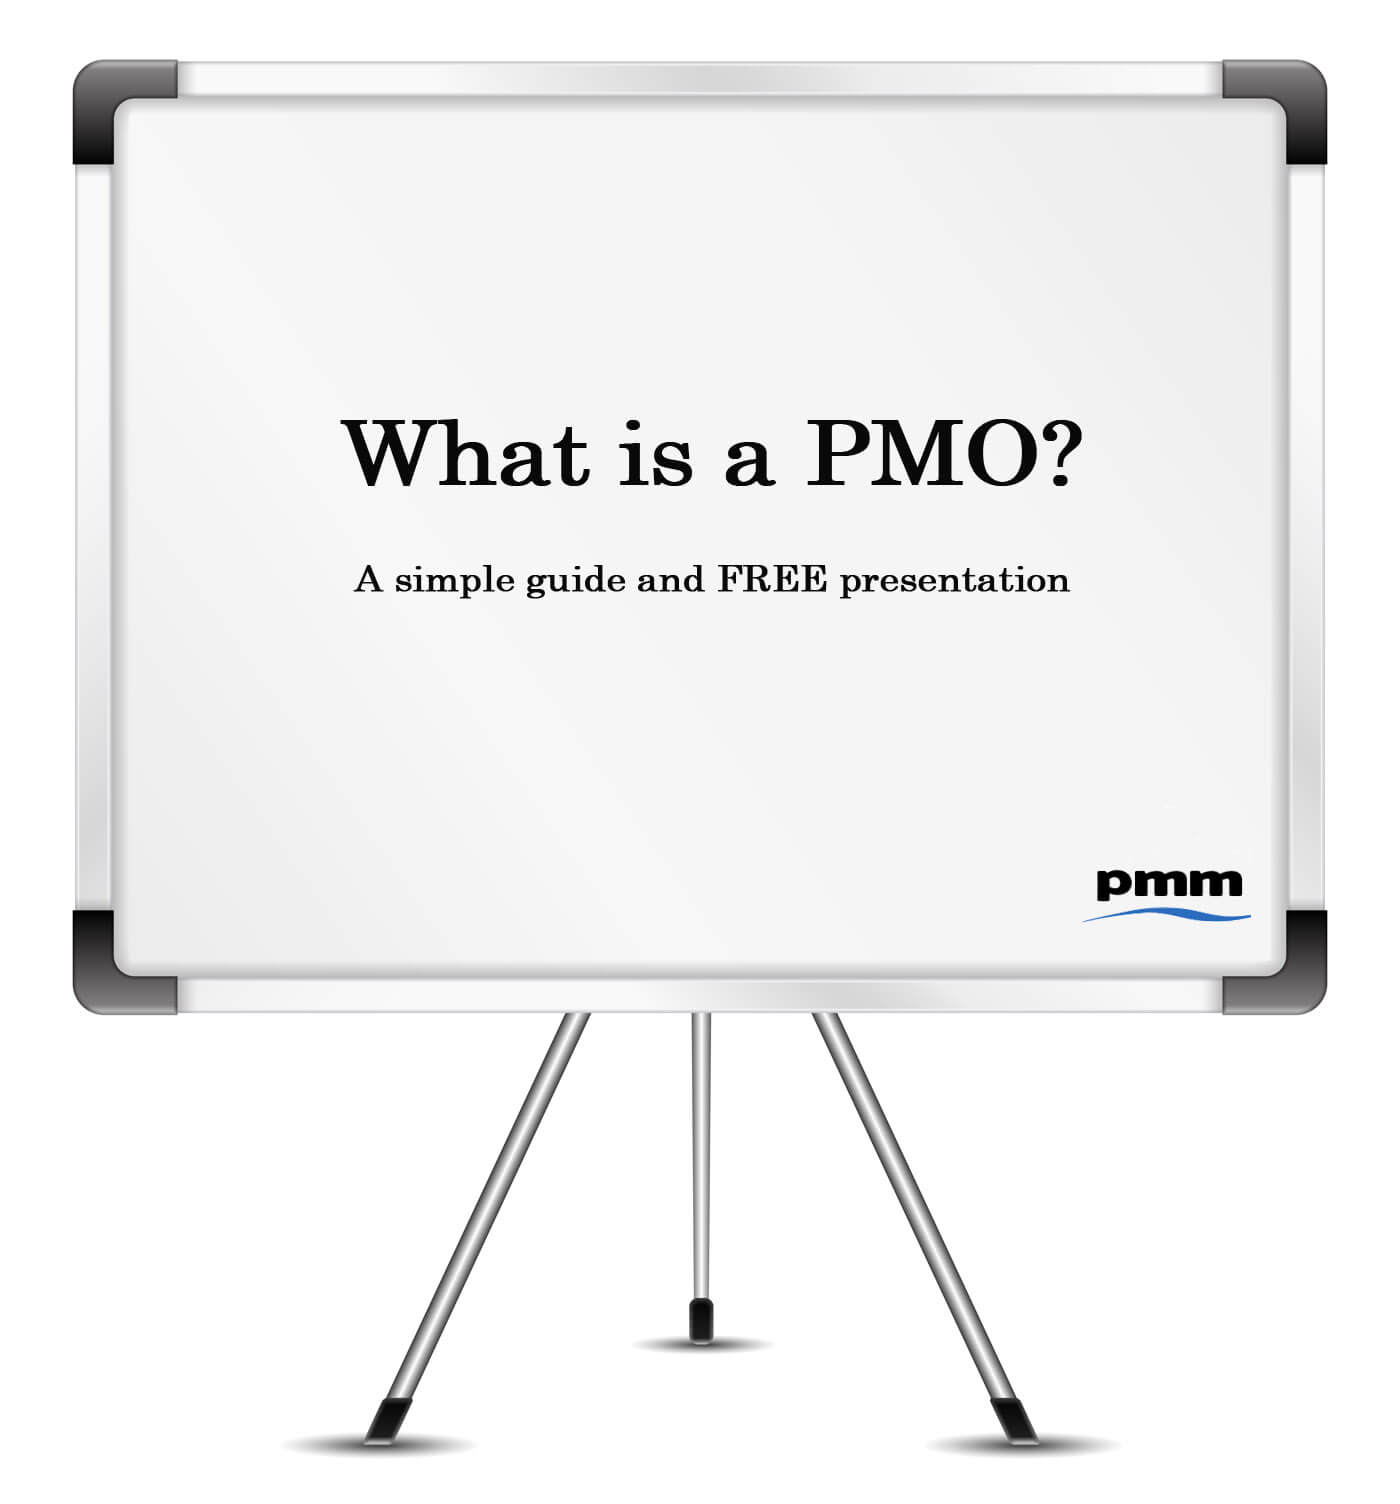 What is a project management office (PMO)?